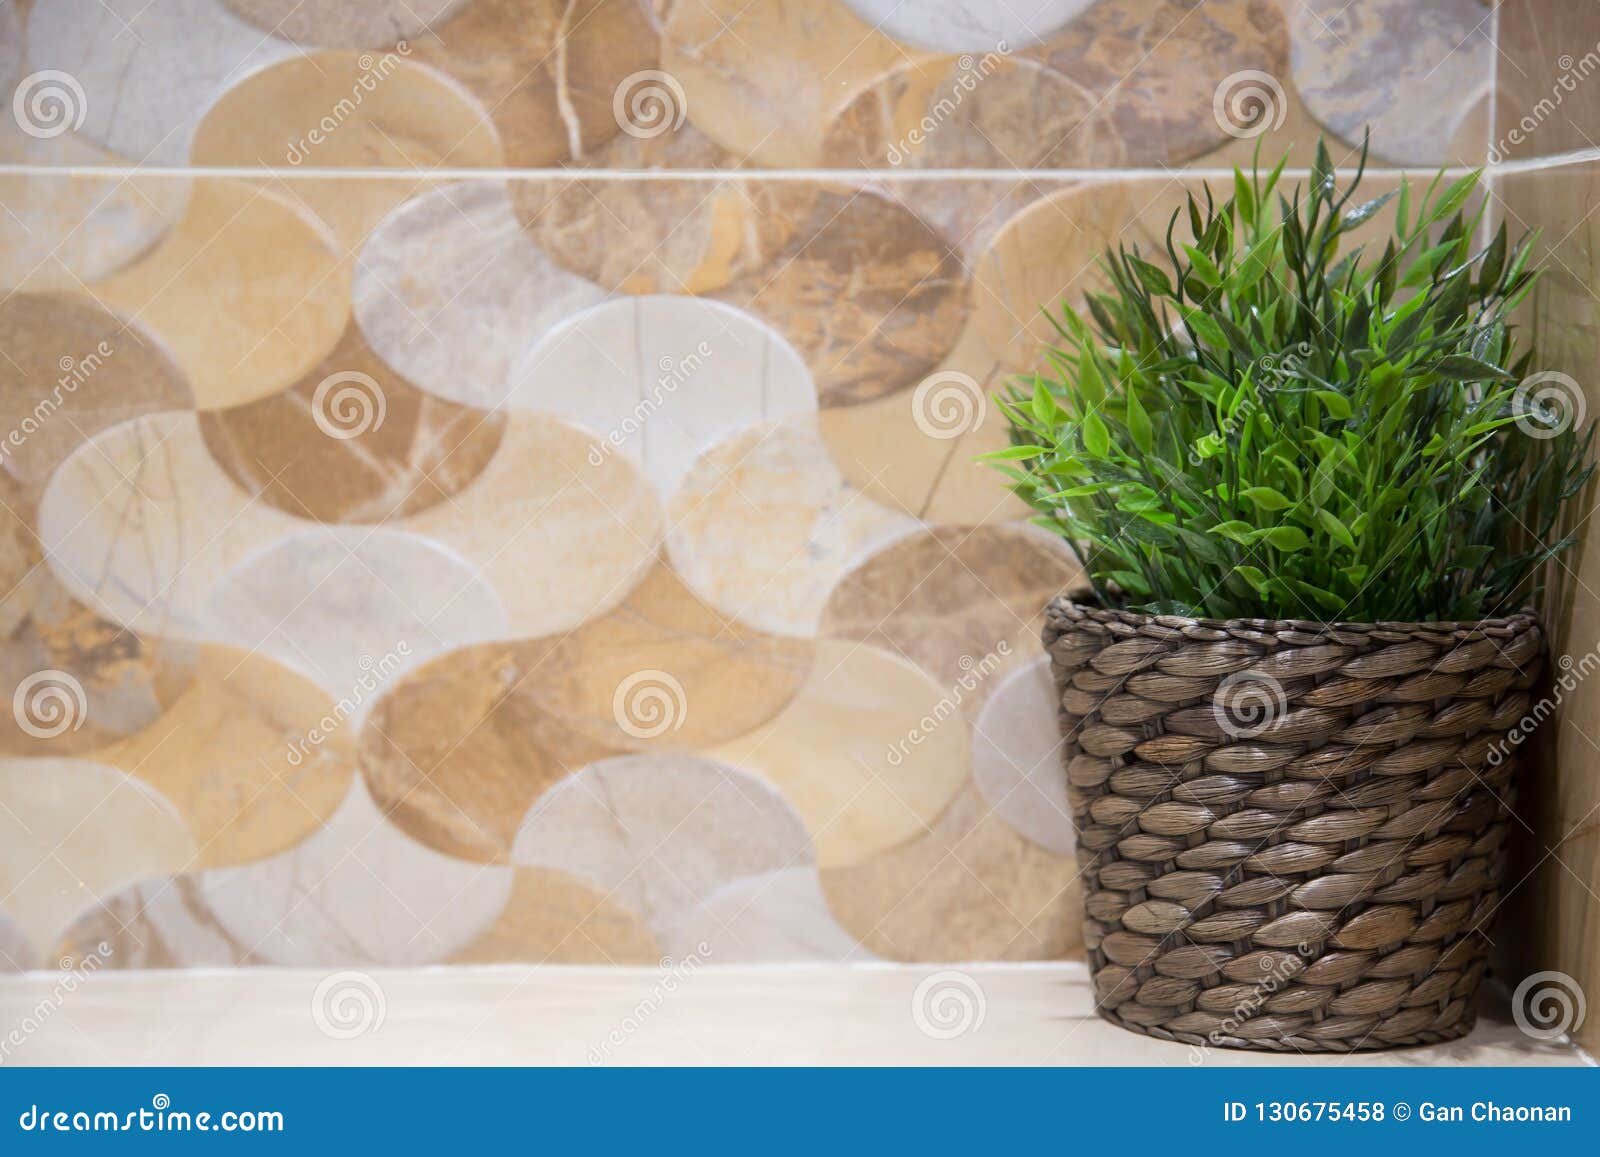 Green Plastic Tree Placed In The Bathroom. Stock Photo